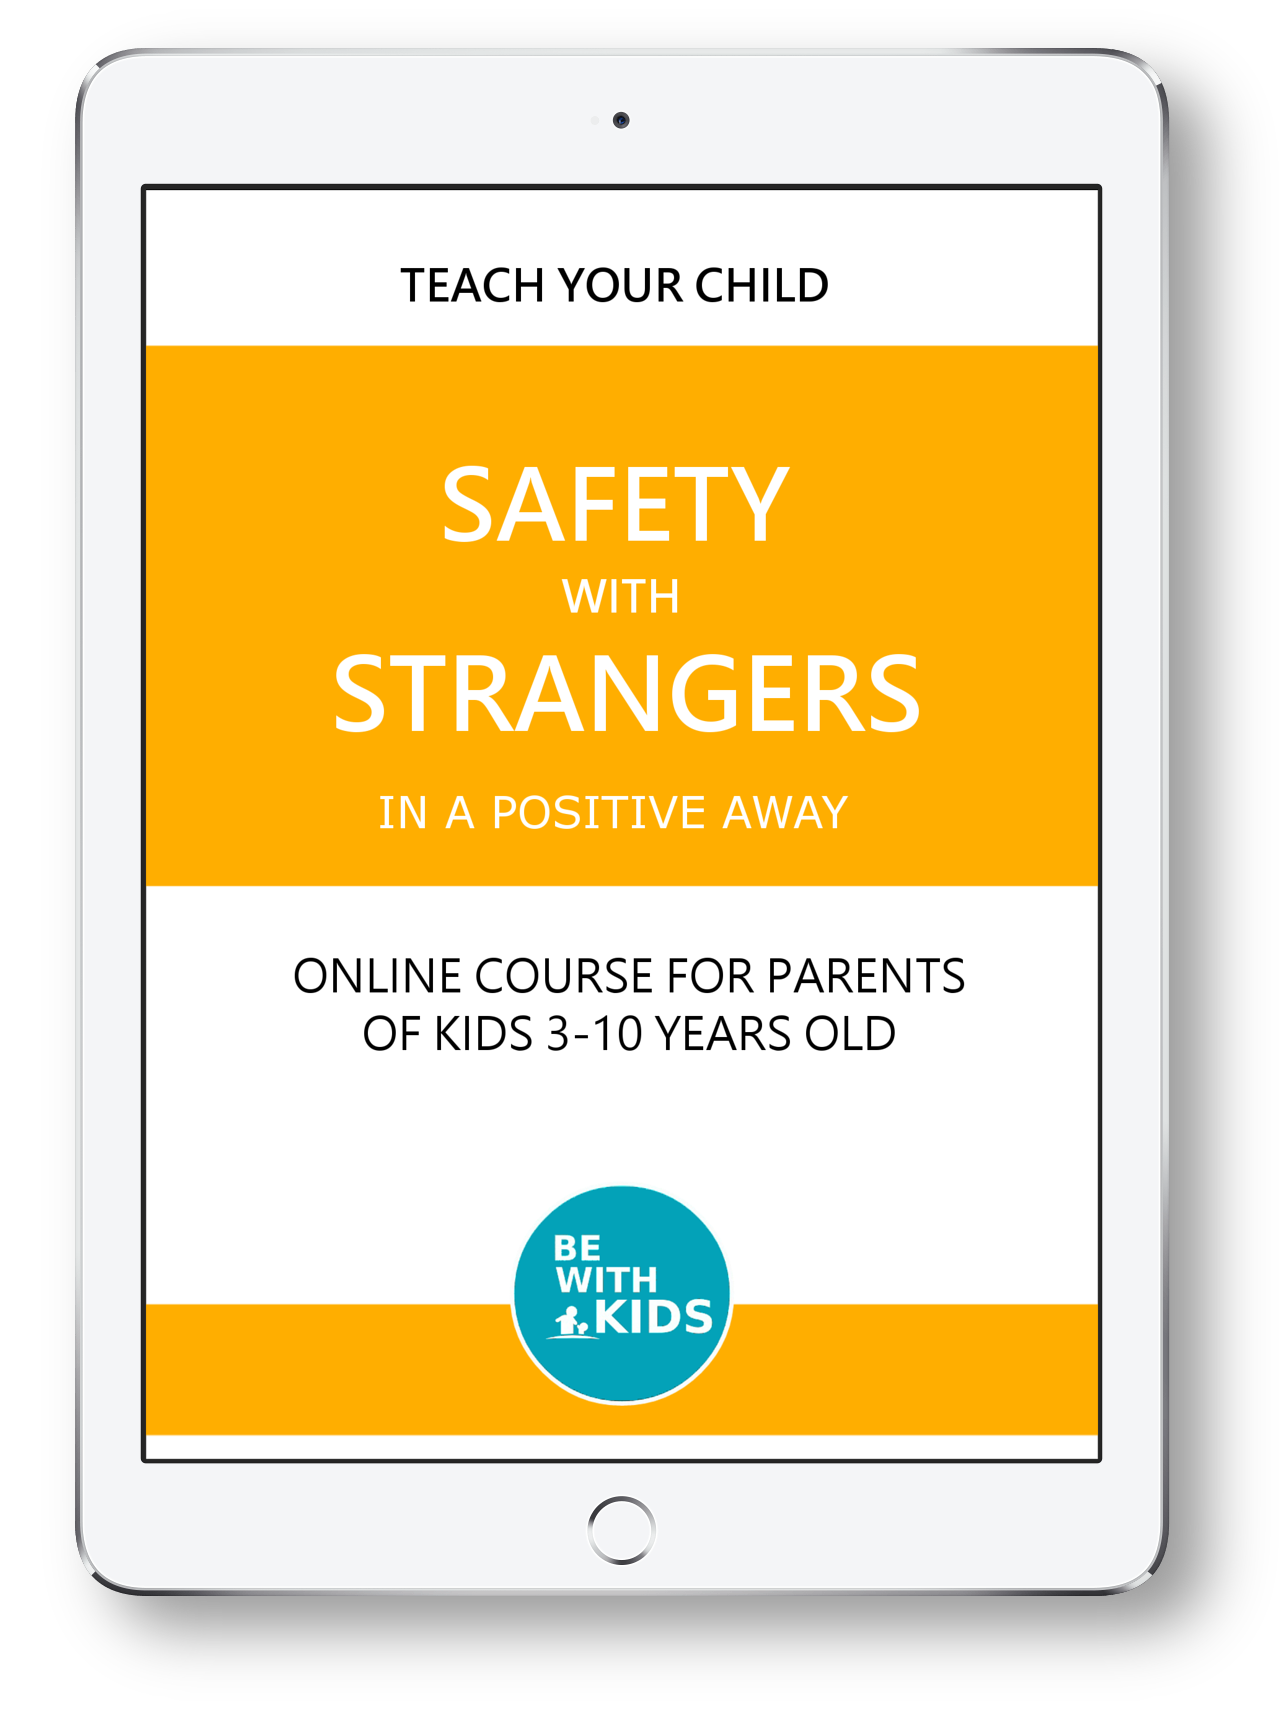 Teach your child safety with strangers in a positive hands-on way using games and kids activities